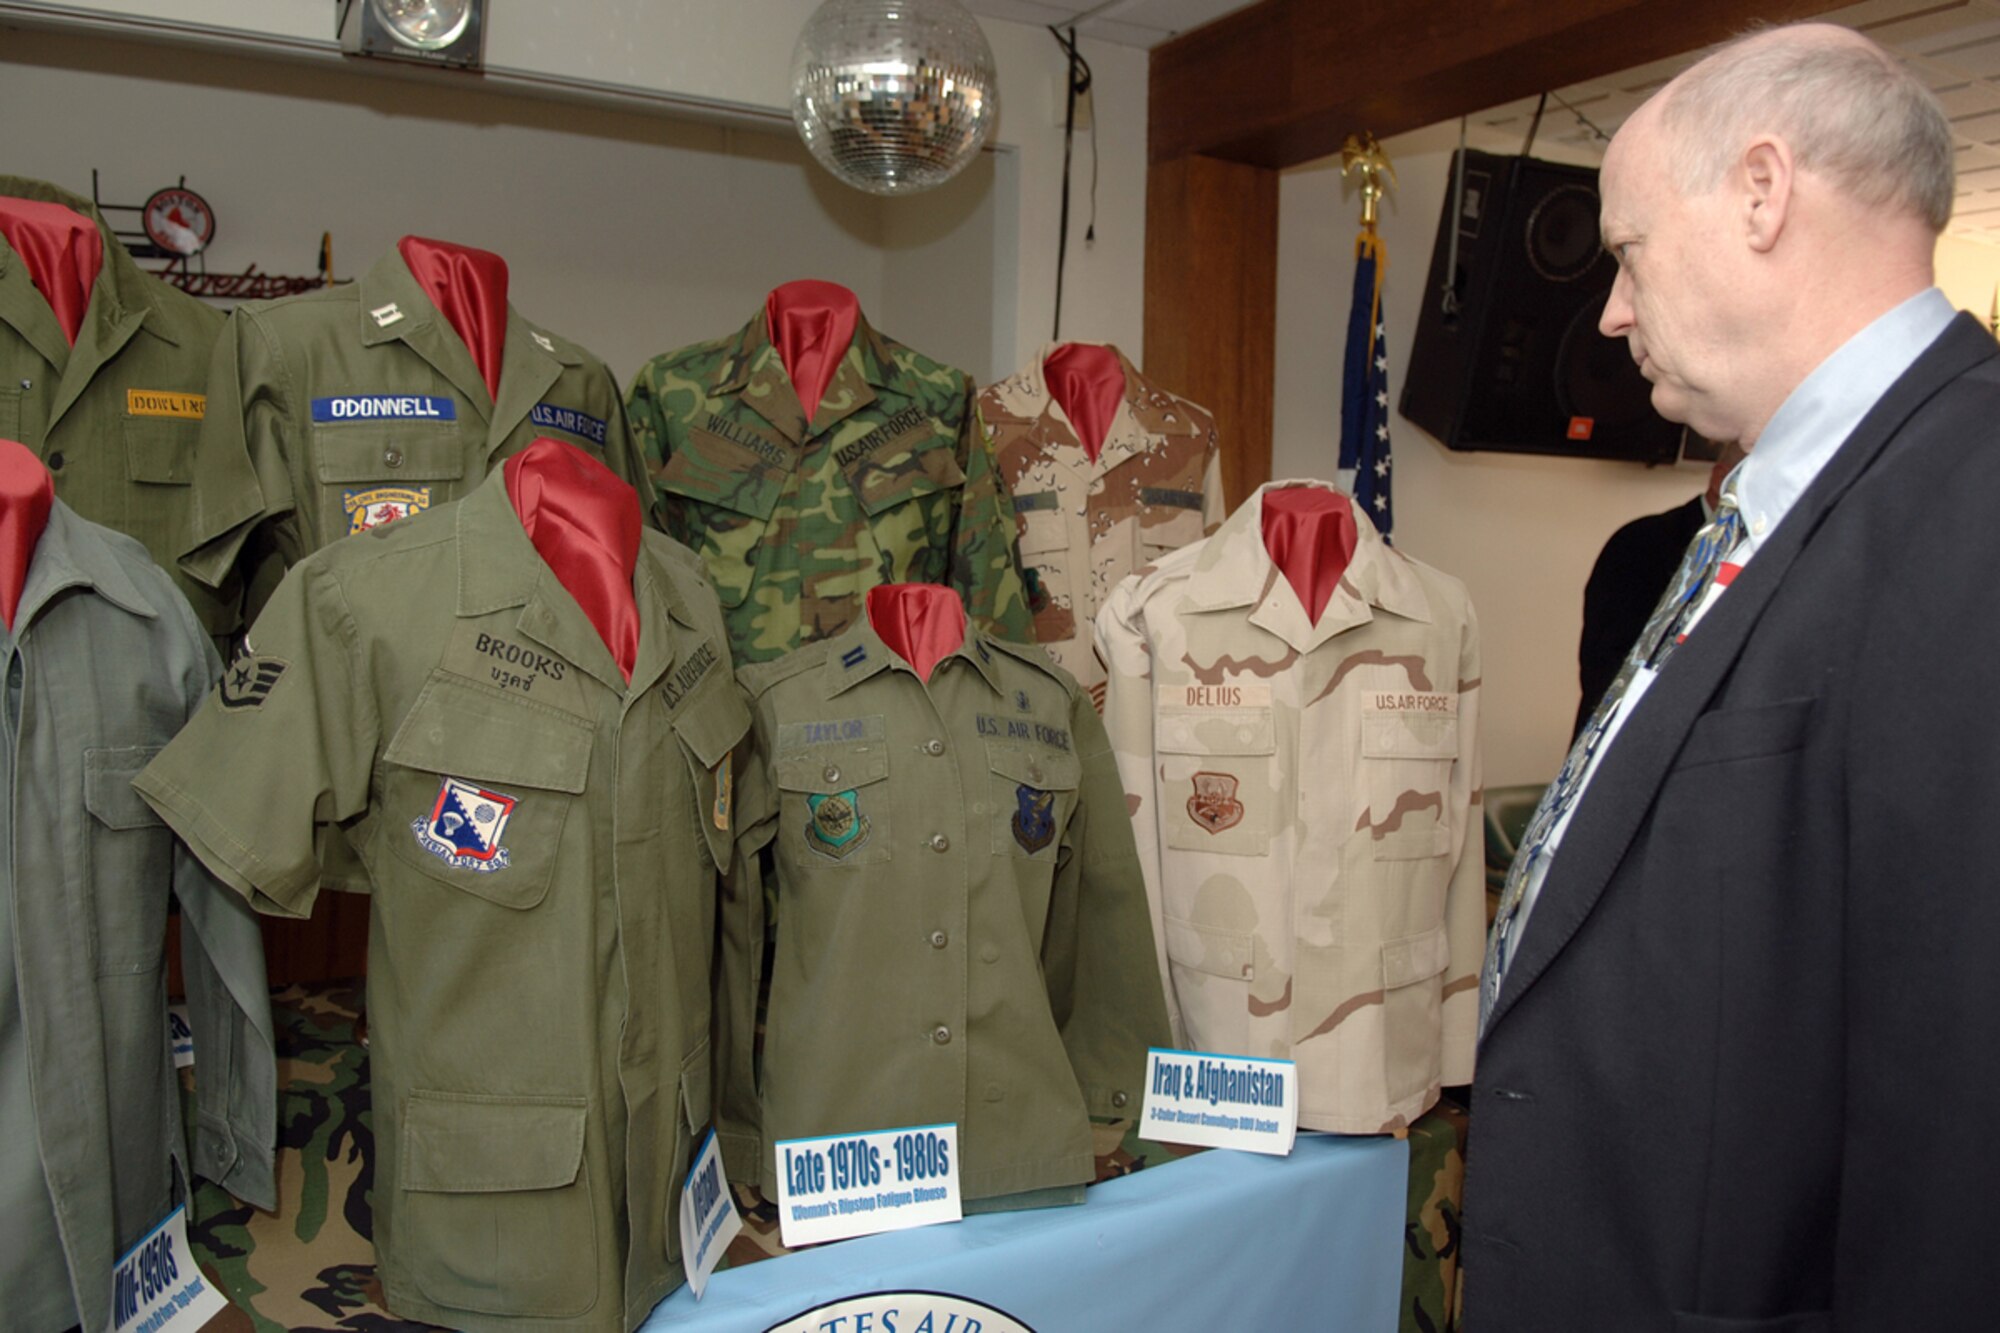 A military retiree pauses to look at a display of vintage Air Force uniforms at the 27th Annual Hanscom Retiree Day Saturday.  The display, which is part of a larger collection, by Will Schaefer is in honor of the Air Force’s 60th Anniversary. The event, sponsored by the Hanscom Retiree Activities Office, featured more than 35 information service tables representing on- and off-base agencies. (US Air Force Photo by Jan Abate)